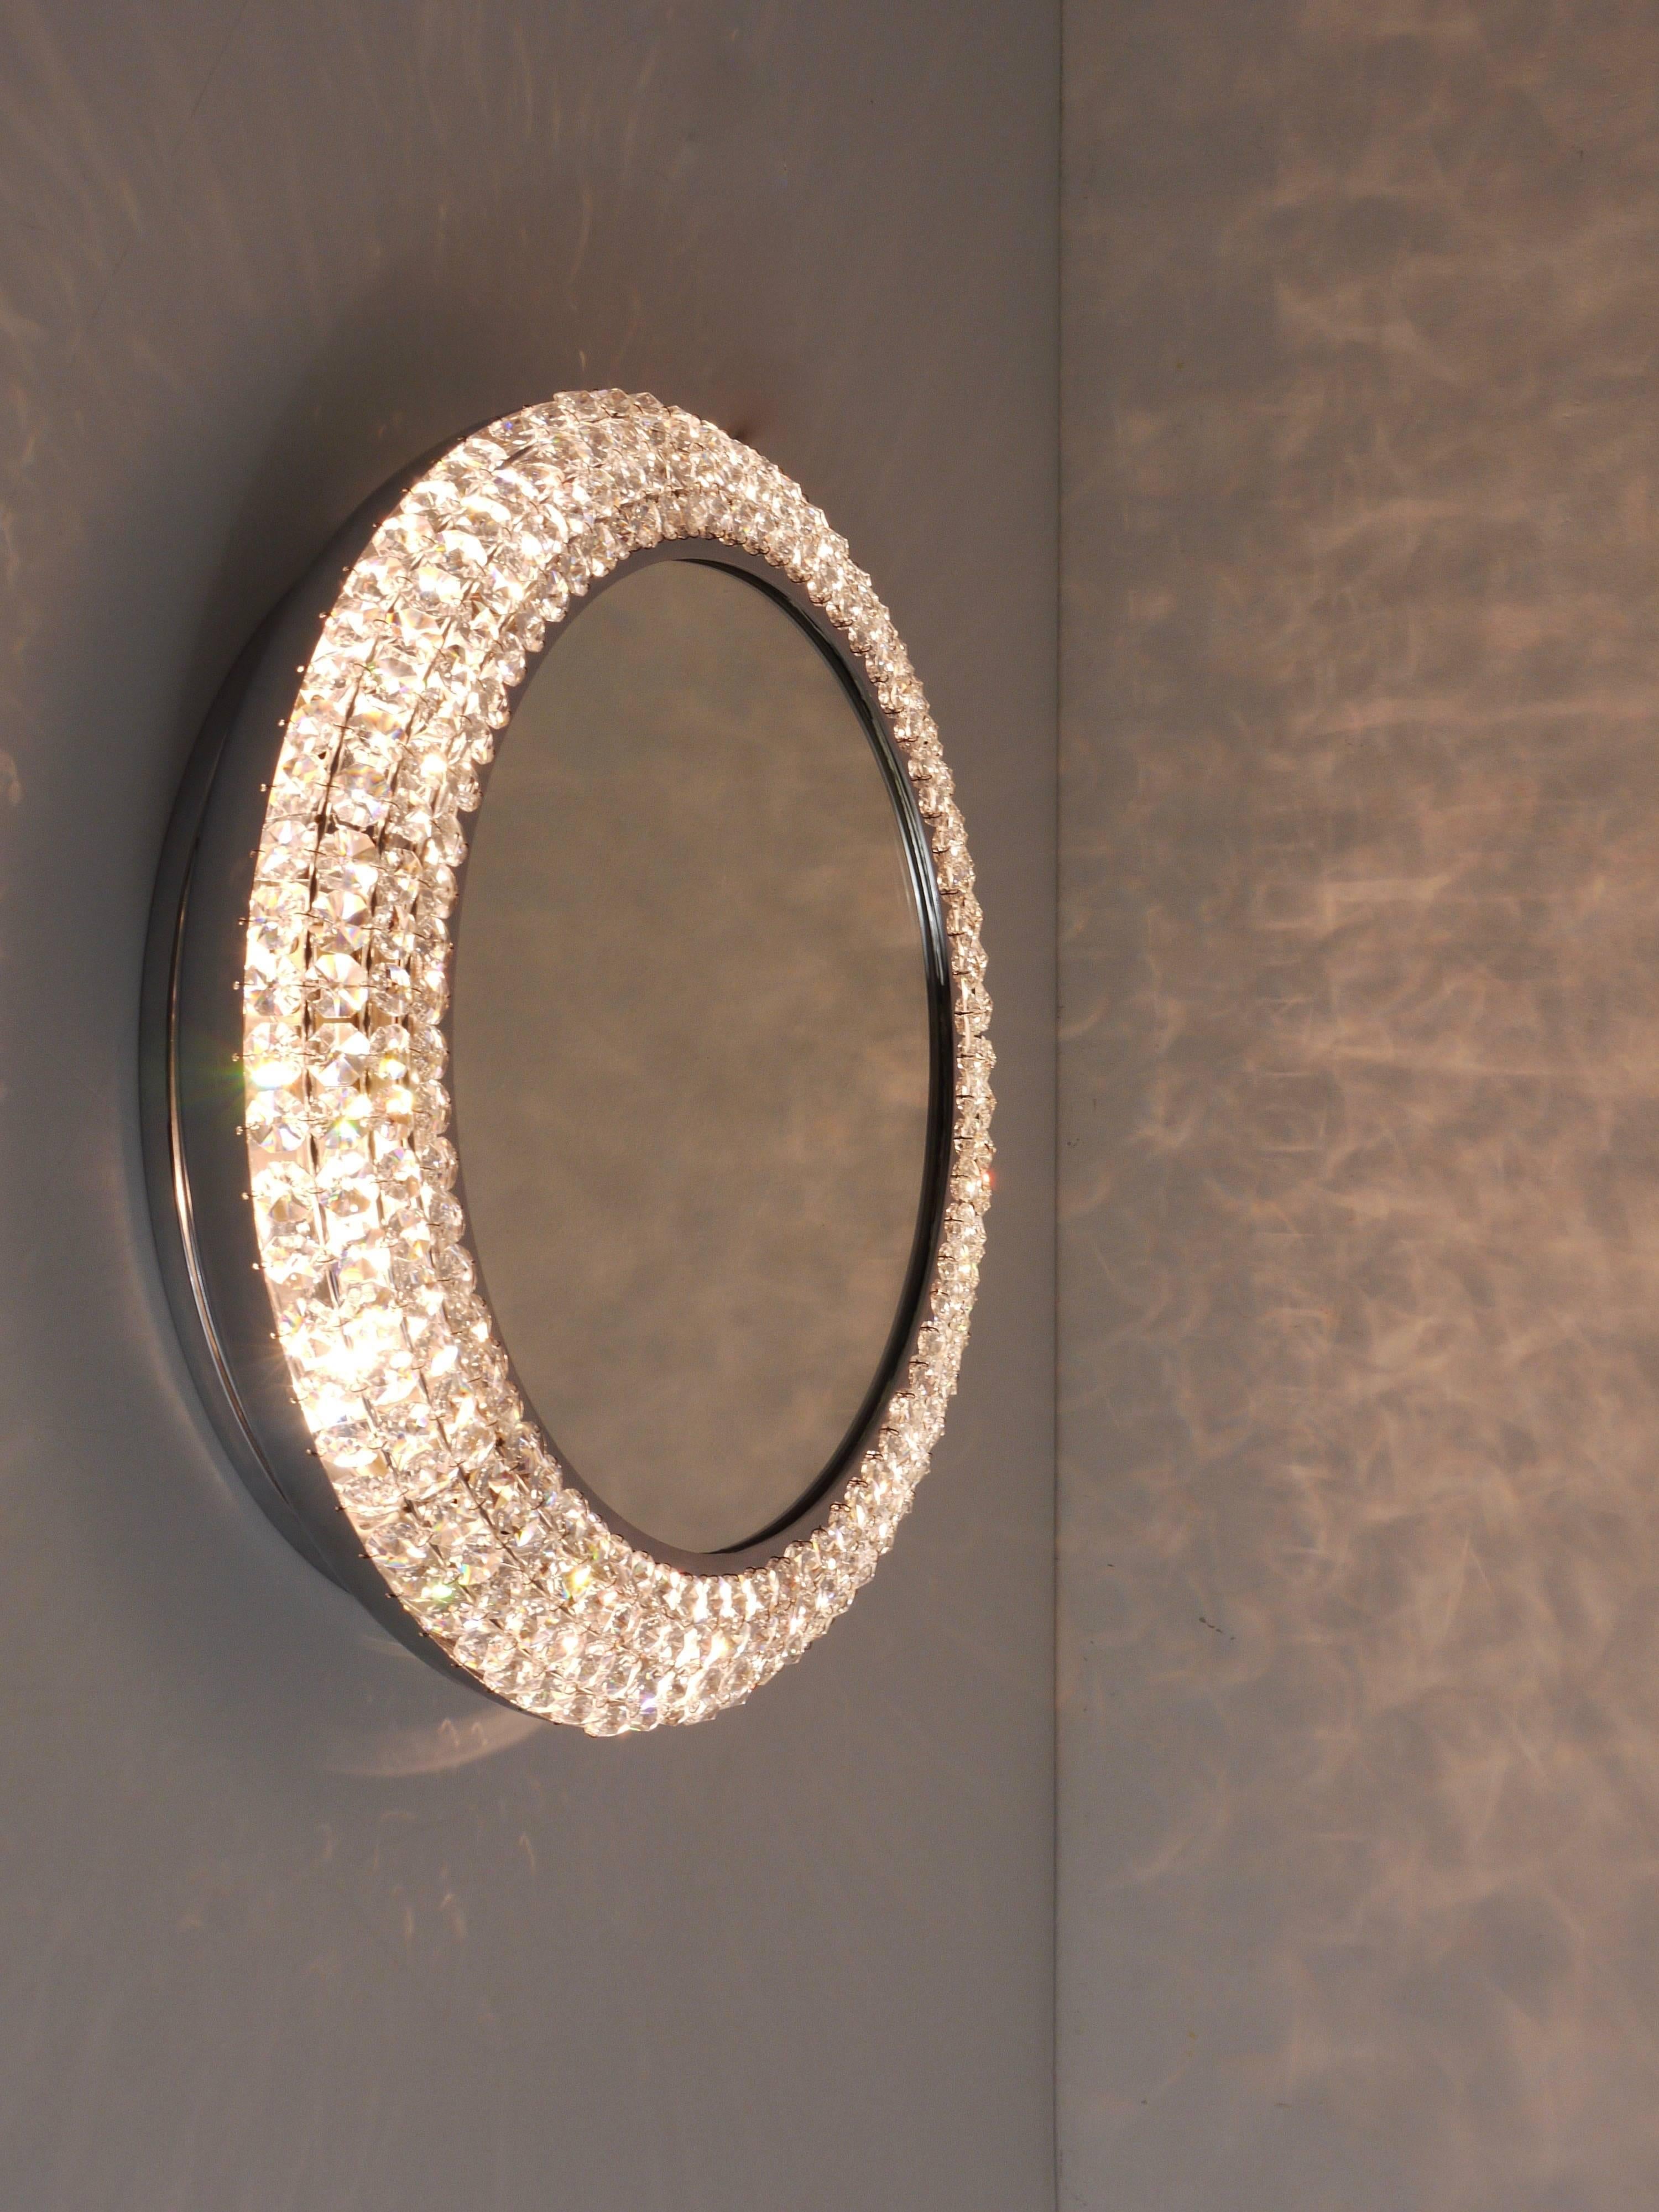 Exquisite round Mid-Century wall mirror, illuminated and encased in a chrome-plated frame covered with hundreds  of faceted crystals. Handcrafted in Austria during the 1960s, this handmade piece exemplifies excellent quality. It features four light